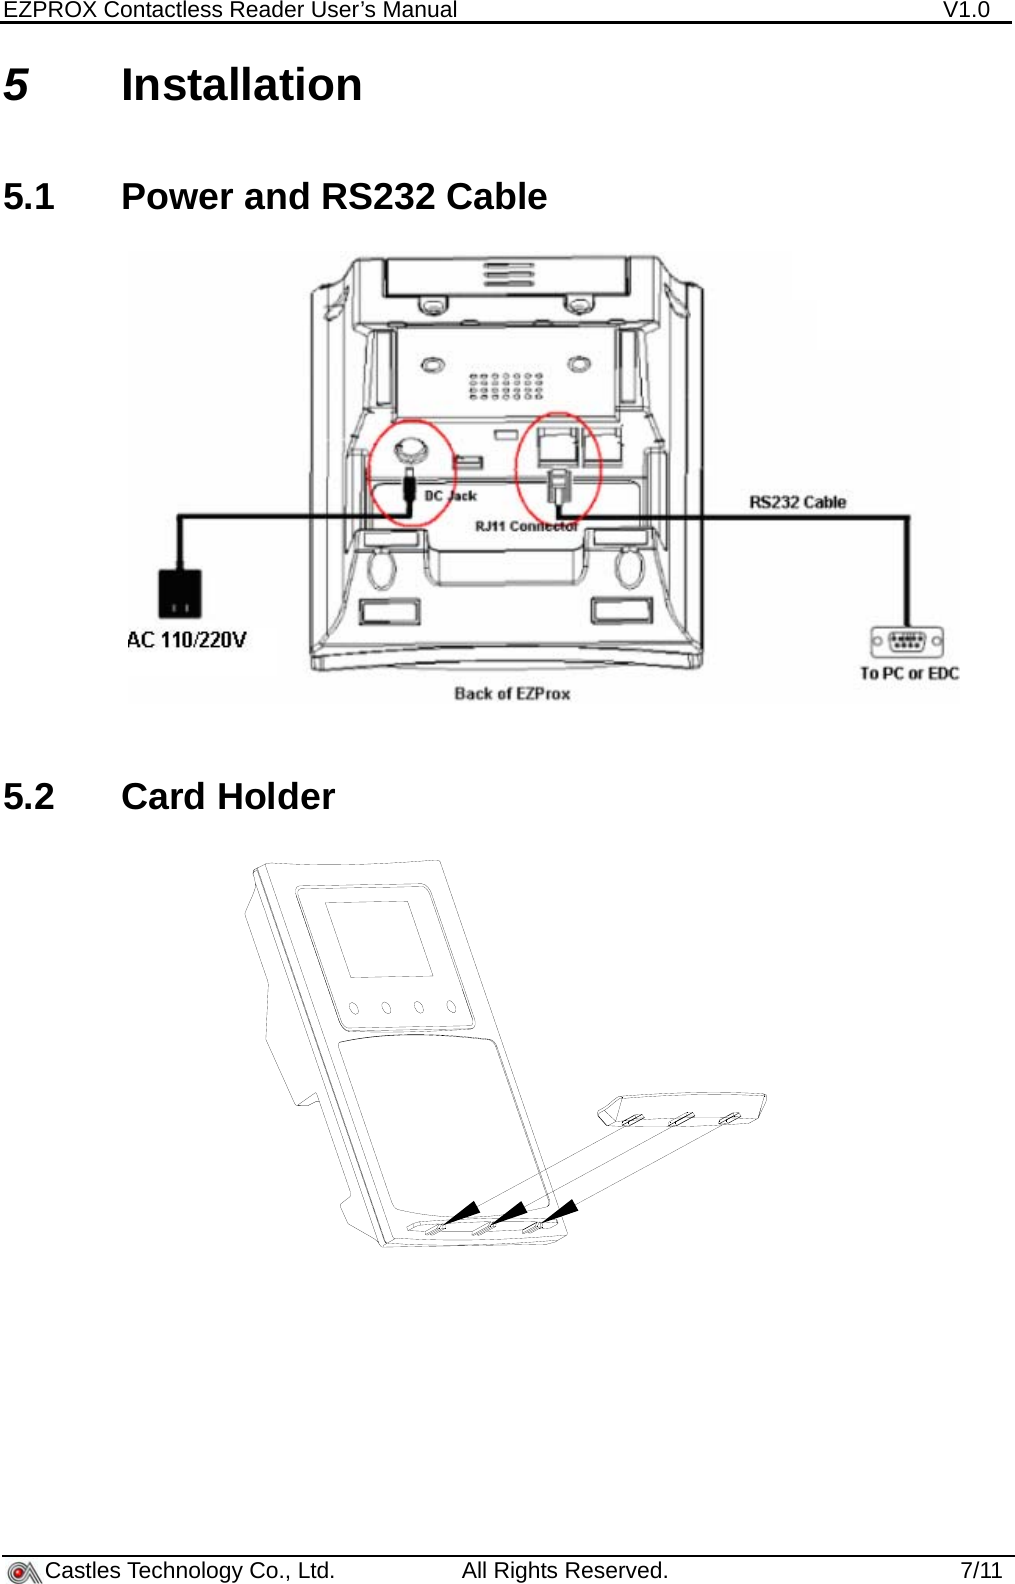 EZPROX Contactless Reader User’s Manual    V1.0     Castles Technology Co., Ltd.           All Rights Reserved.                           7/115  Installation 5.1  Power and RS232 Cable  5.2 Card Holder  